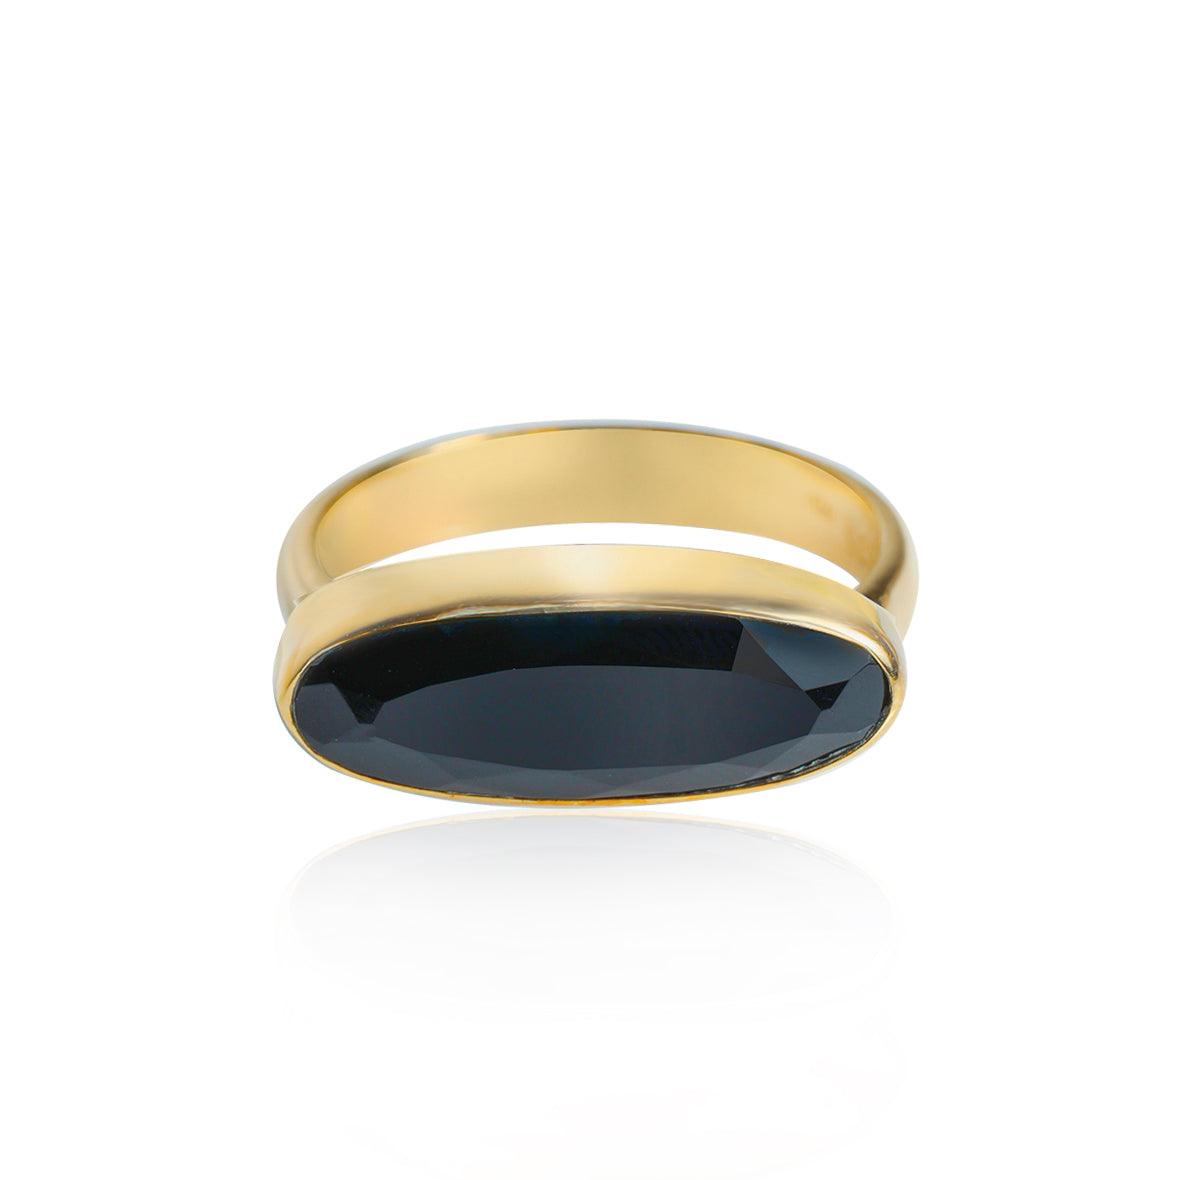 Black Onyx Ring in 14k Gold Over Silver Jewelry - YoTreasure